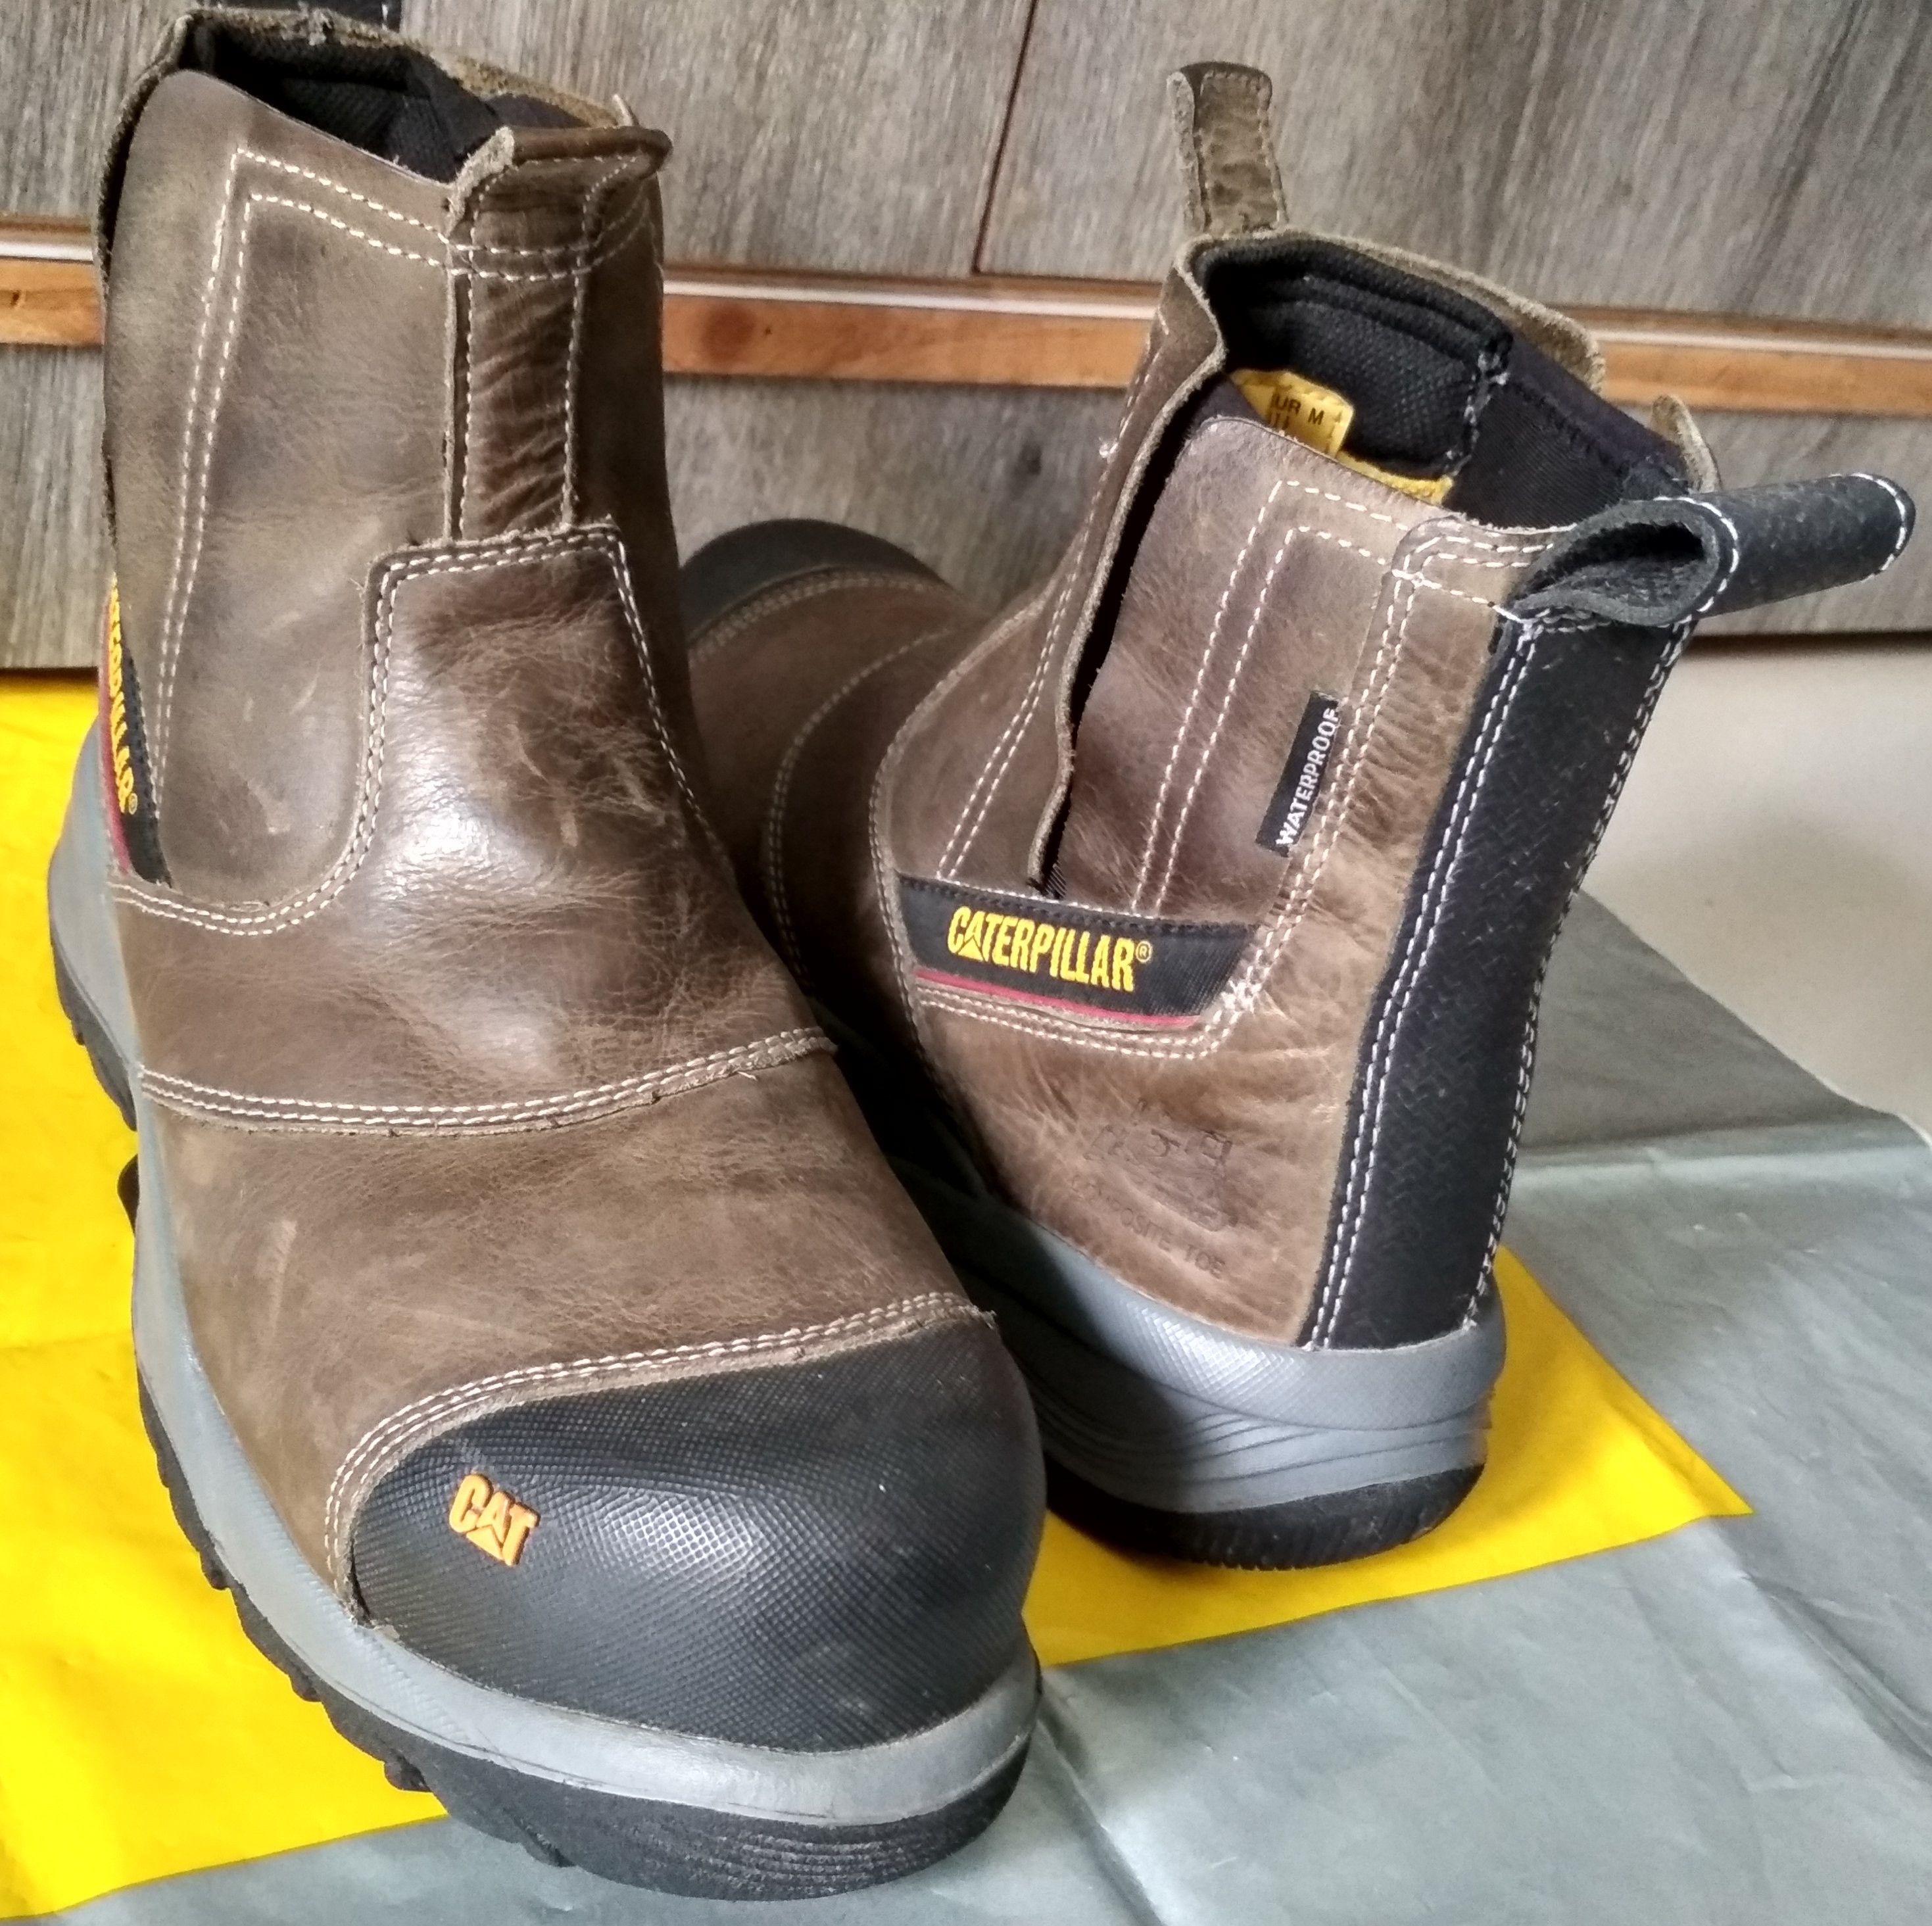 Caterpillar Cat Pull on waterproof Boots for Men's Size US 8 / EU 41 - 6 Thumbnail